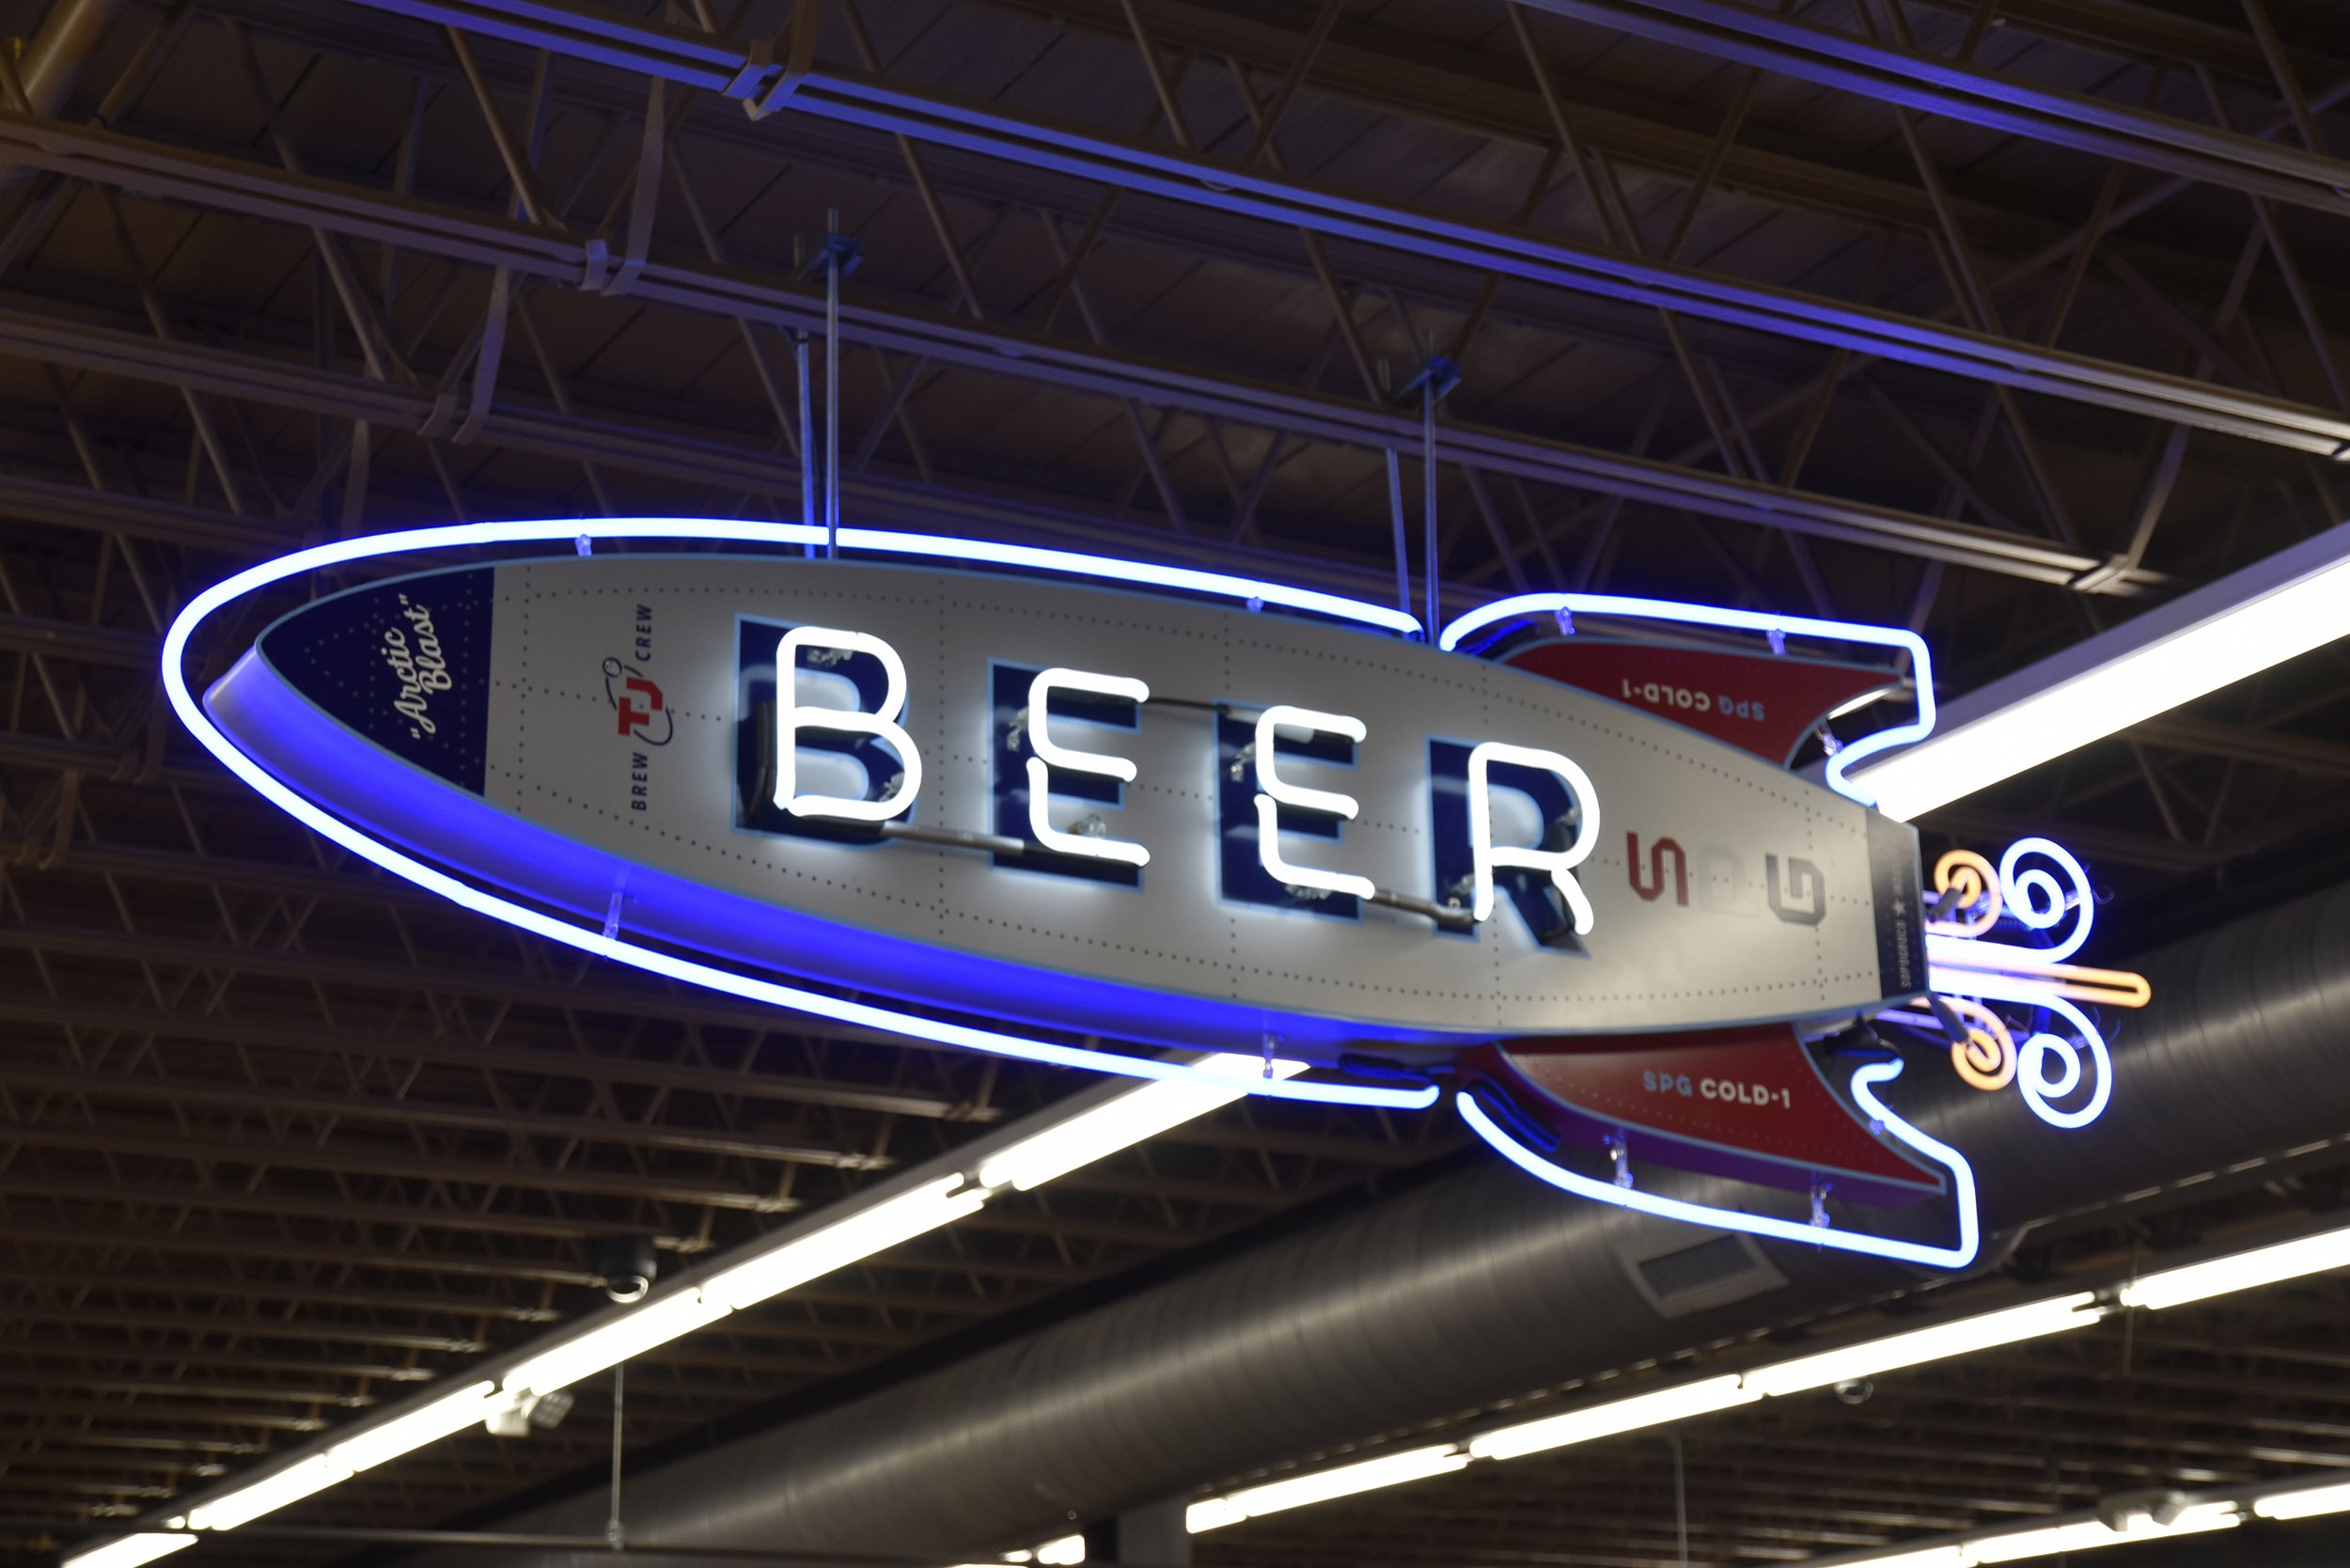  South Point Grocery  Downtown Memphis  “Rocket Ship” neon beer sign with flashing action vapor trail exhaust  Branding creative and design by Chuck Mitchell  Sign fabrication and installation by Frank Balton Sign Company 